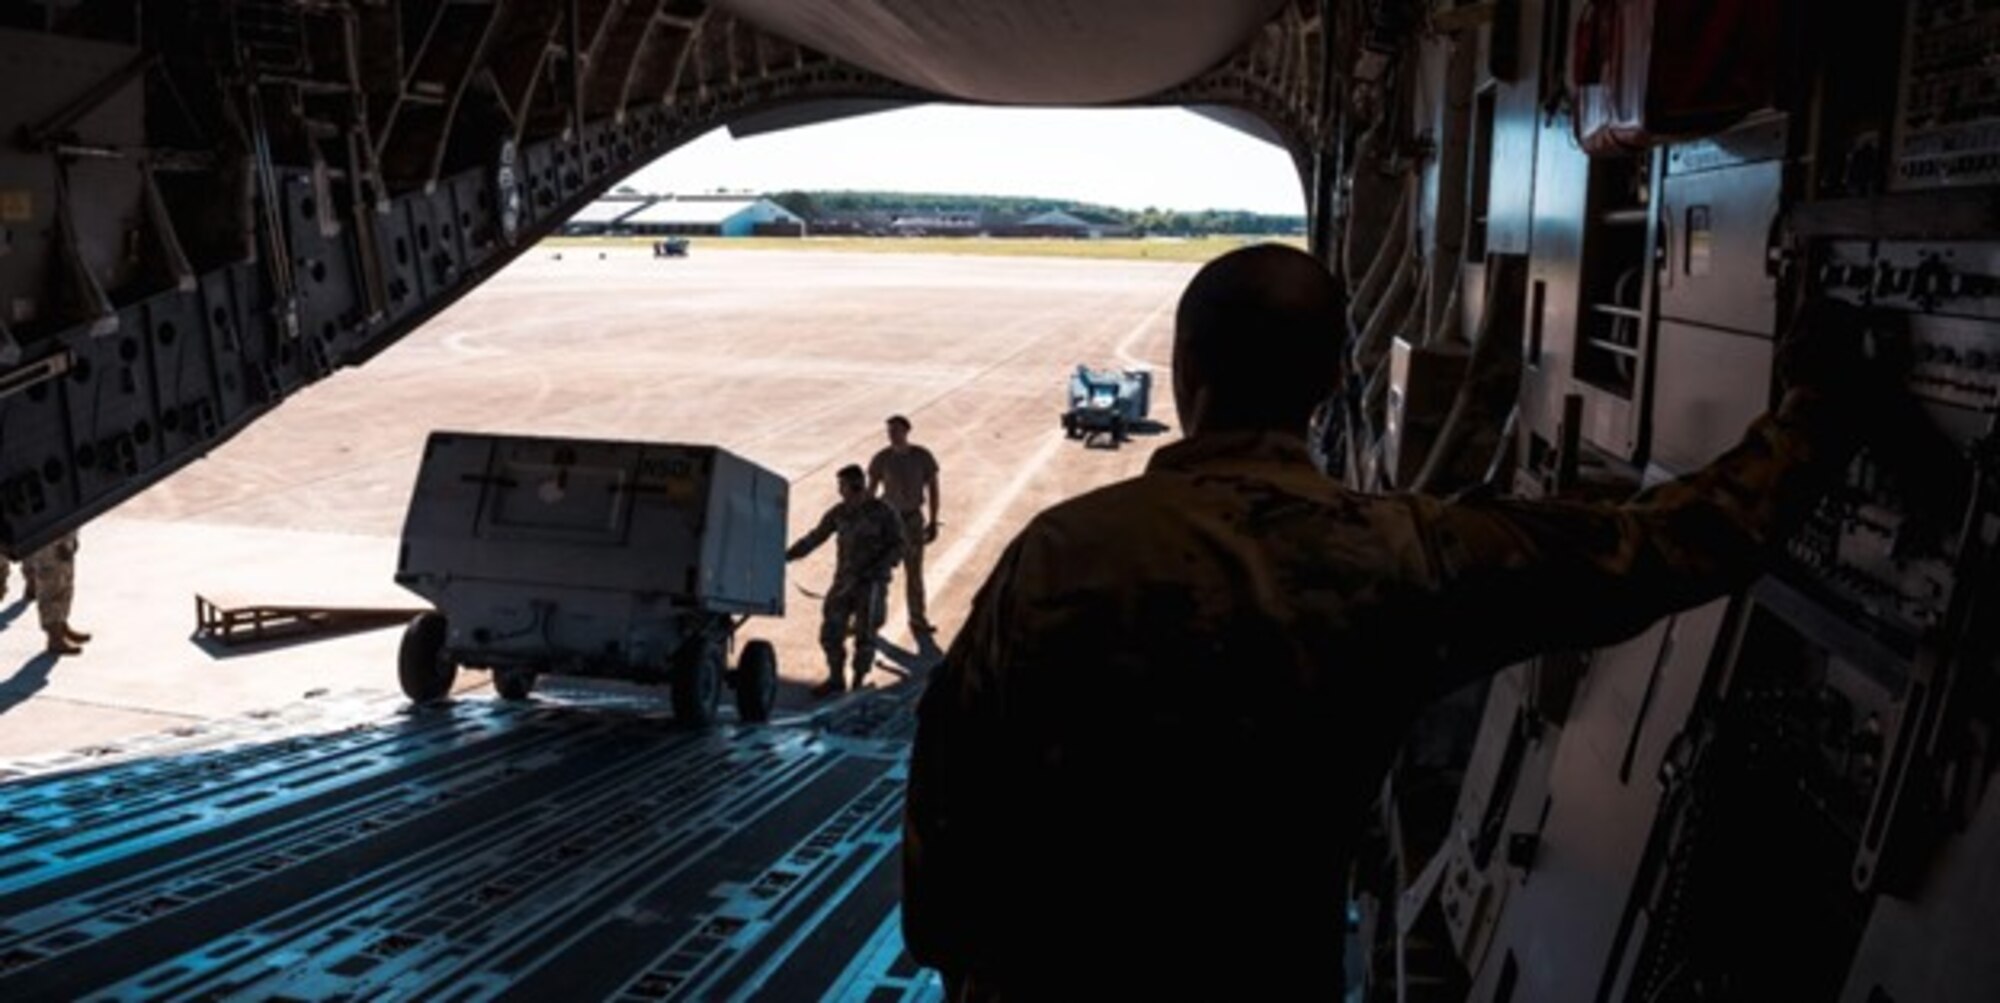 U.S. Air Force Airmen assigned to the 6th Airlift Squadron and 1st Fighter Wing off-load Aerospace Ground Equipment on Joint Base Langley-Eustis, V.A., Sept. 27, 2022.